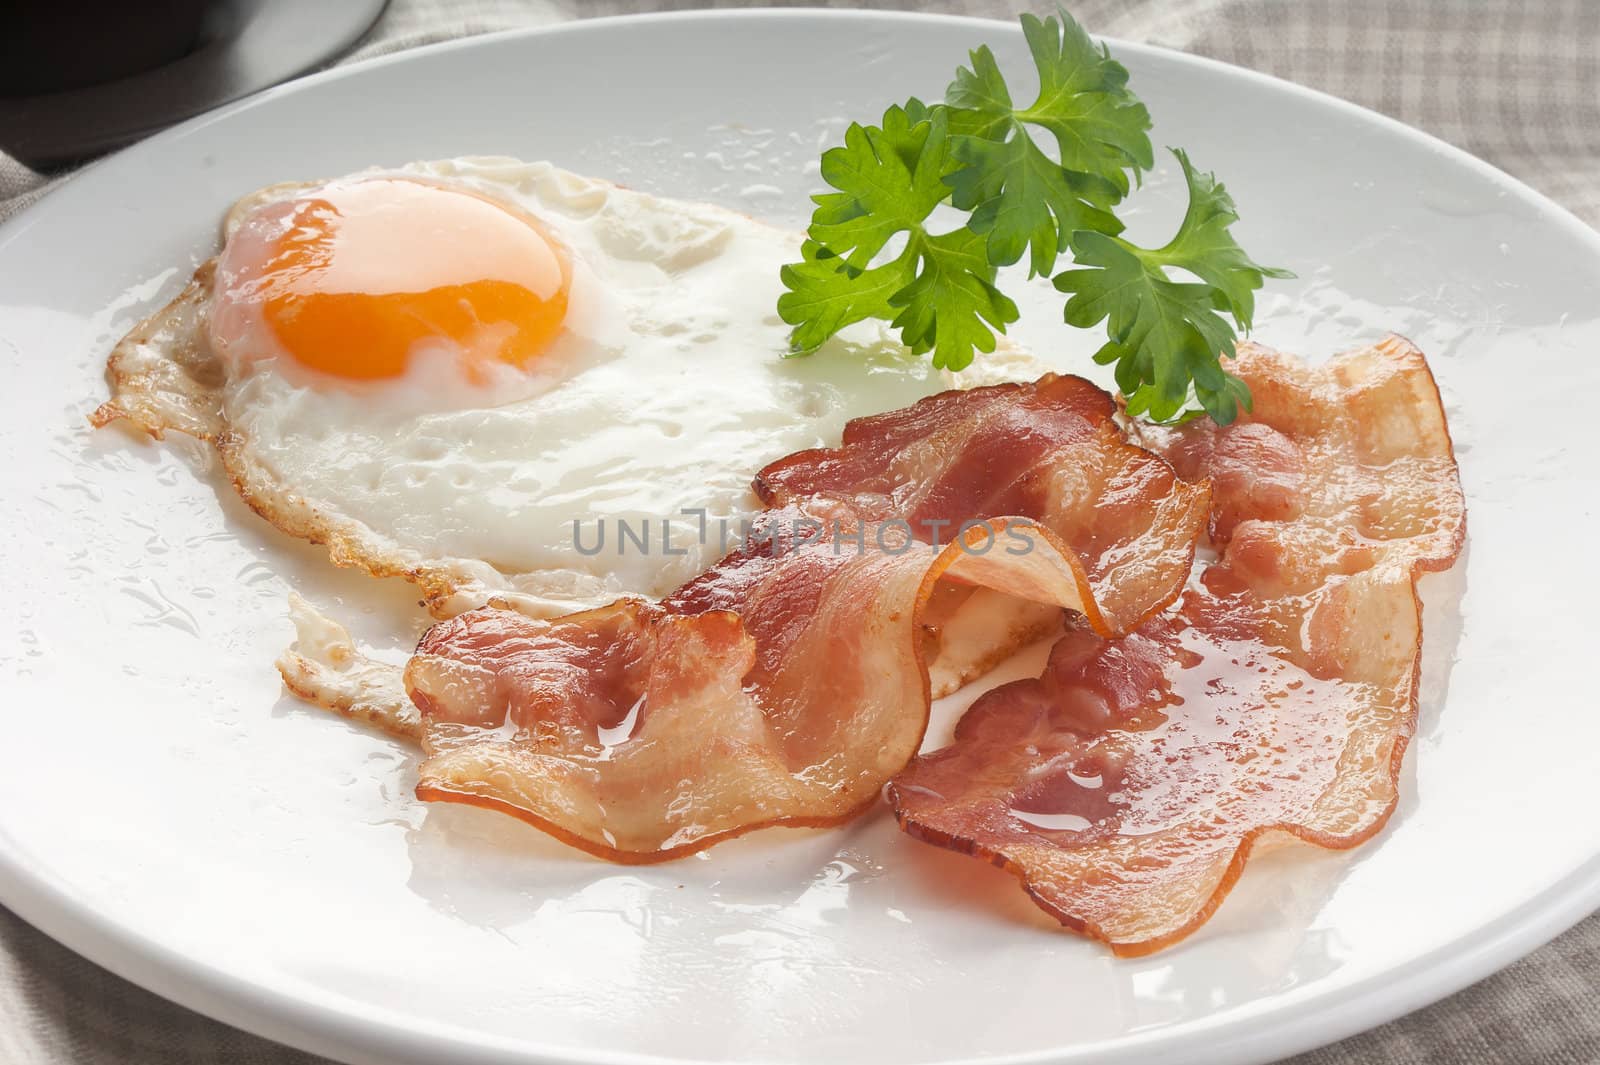 Fried egg and bacon by Angorius